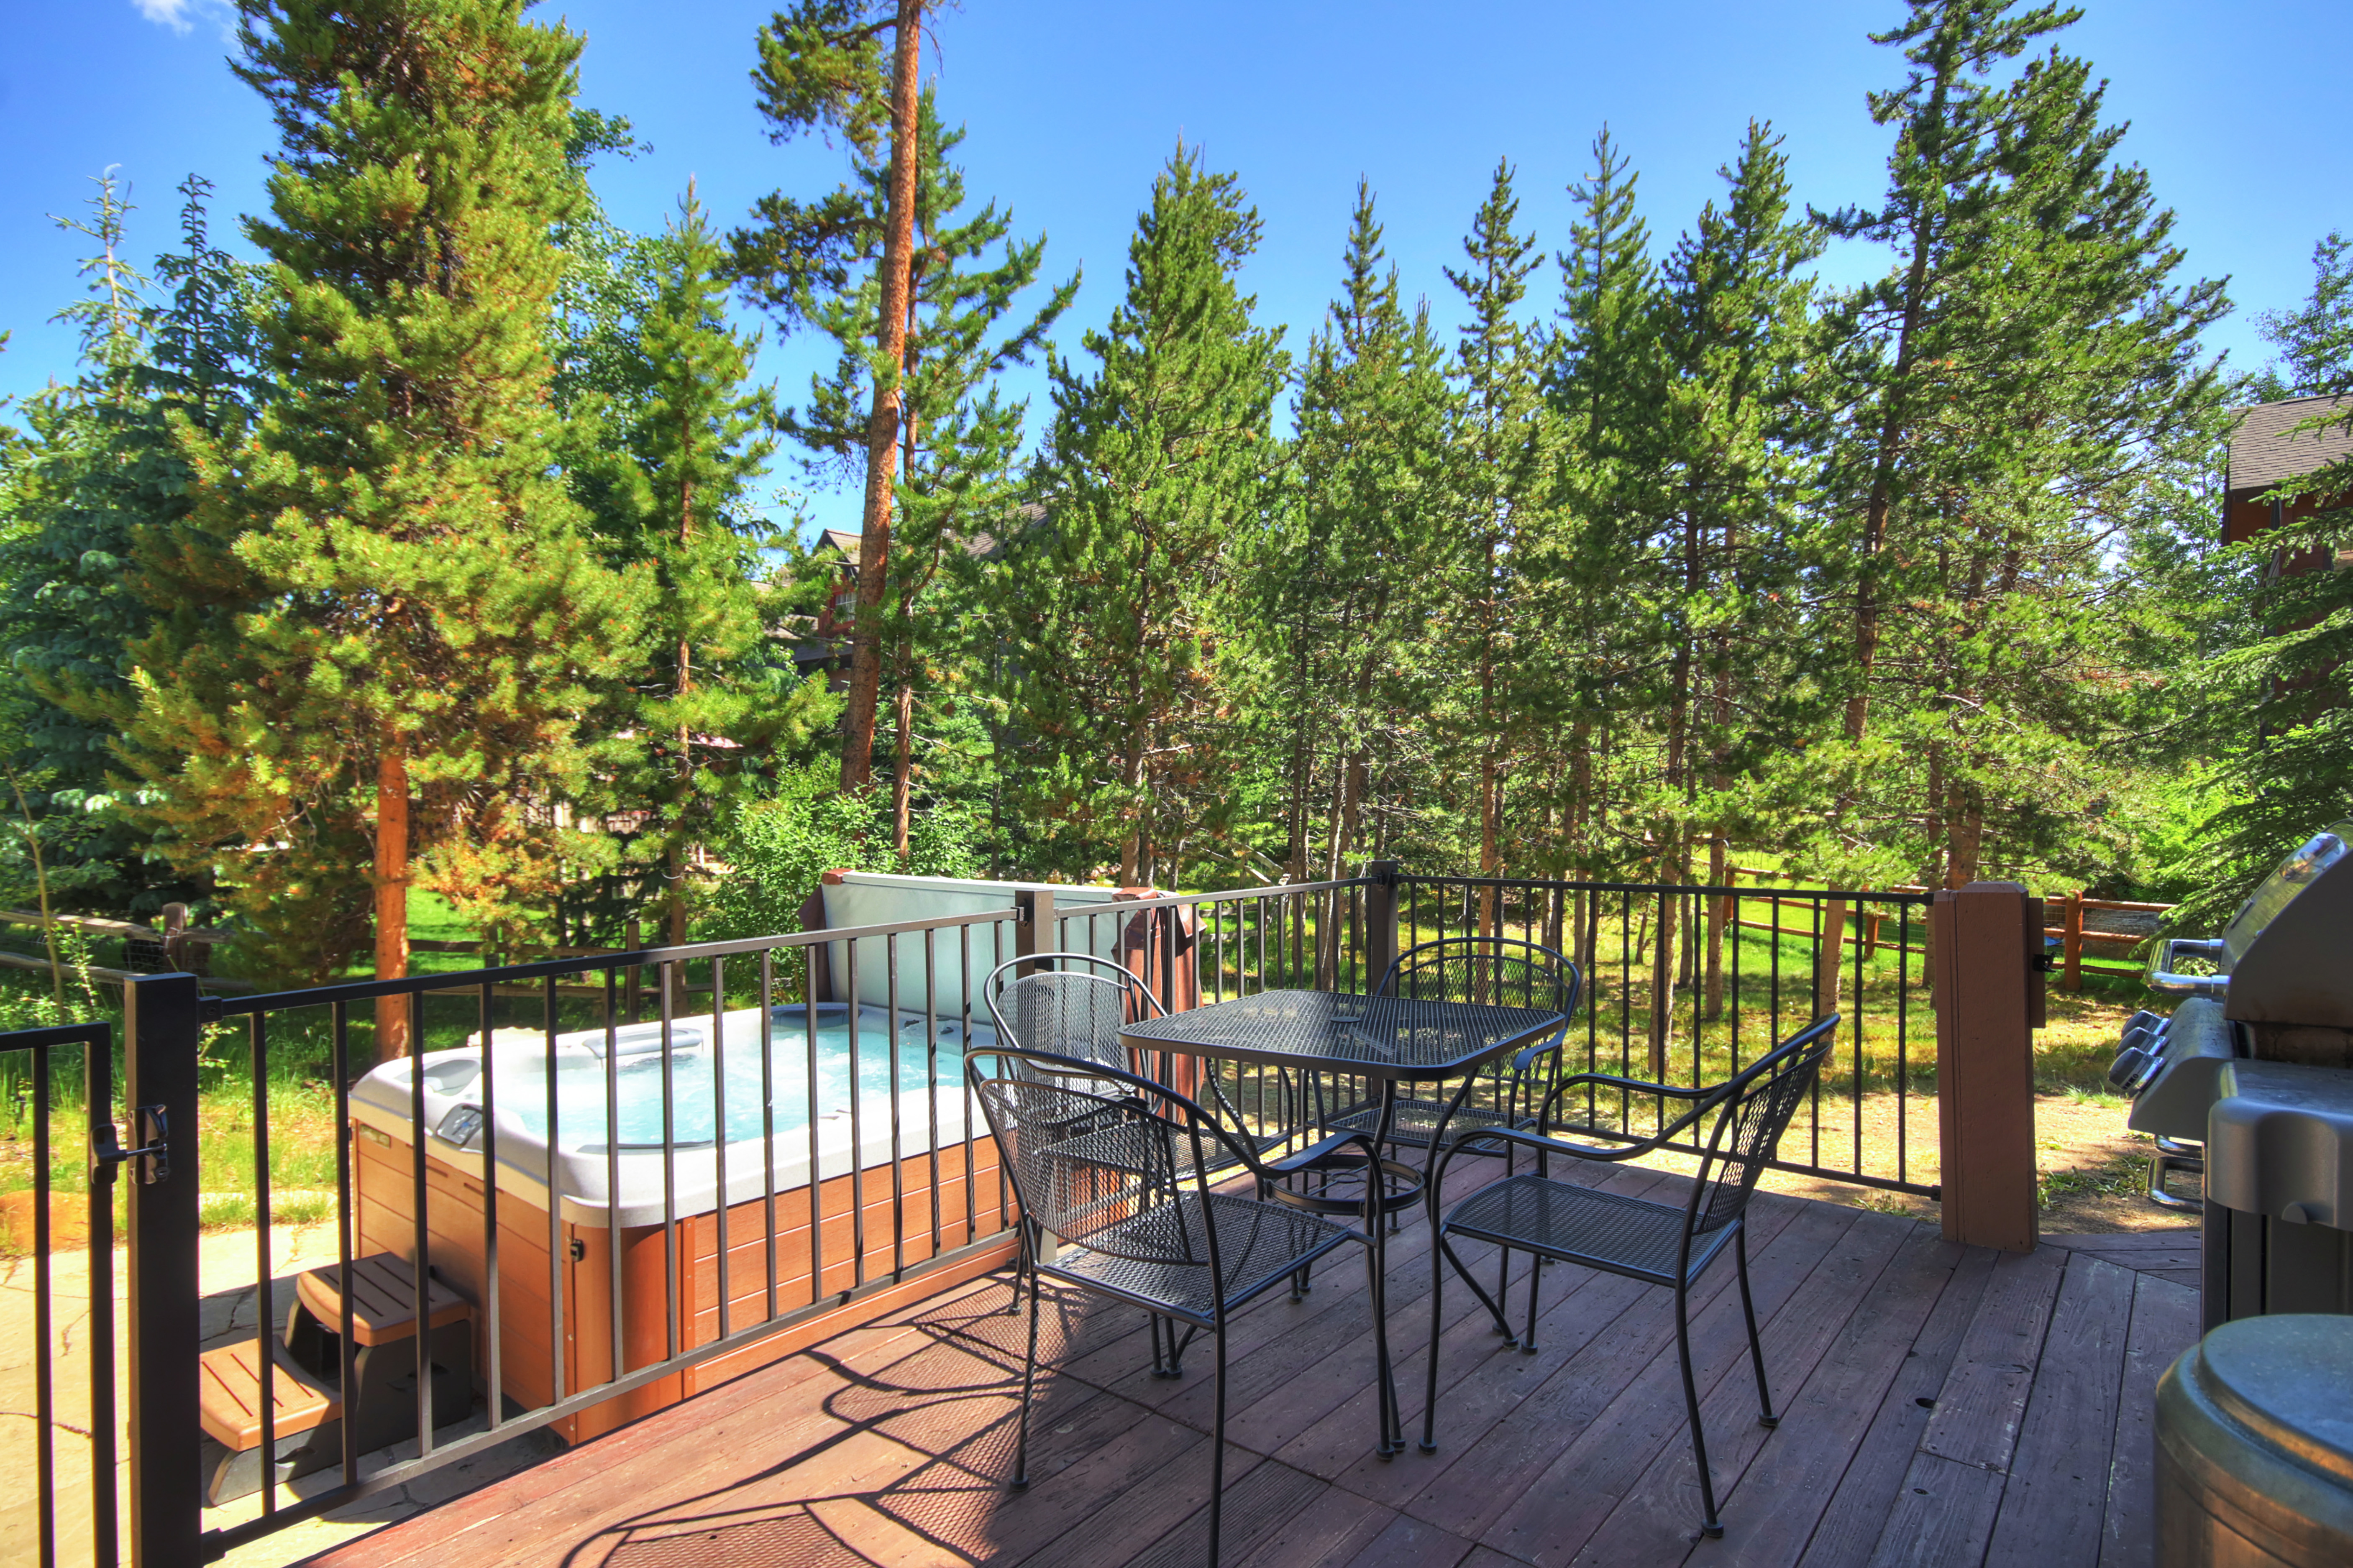 Enjoy meals on the back deck during the warmer months. - Buffalo Mountain Vista Frisco Vacation Rental